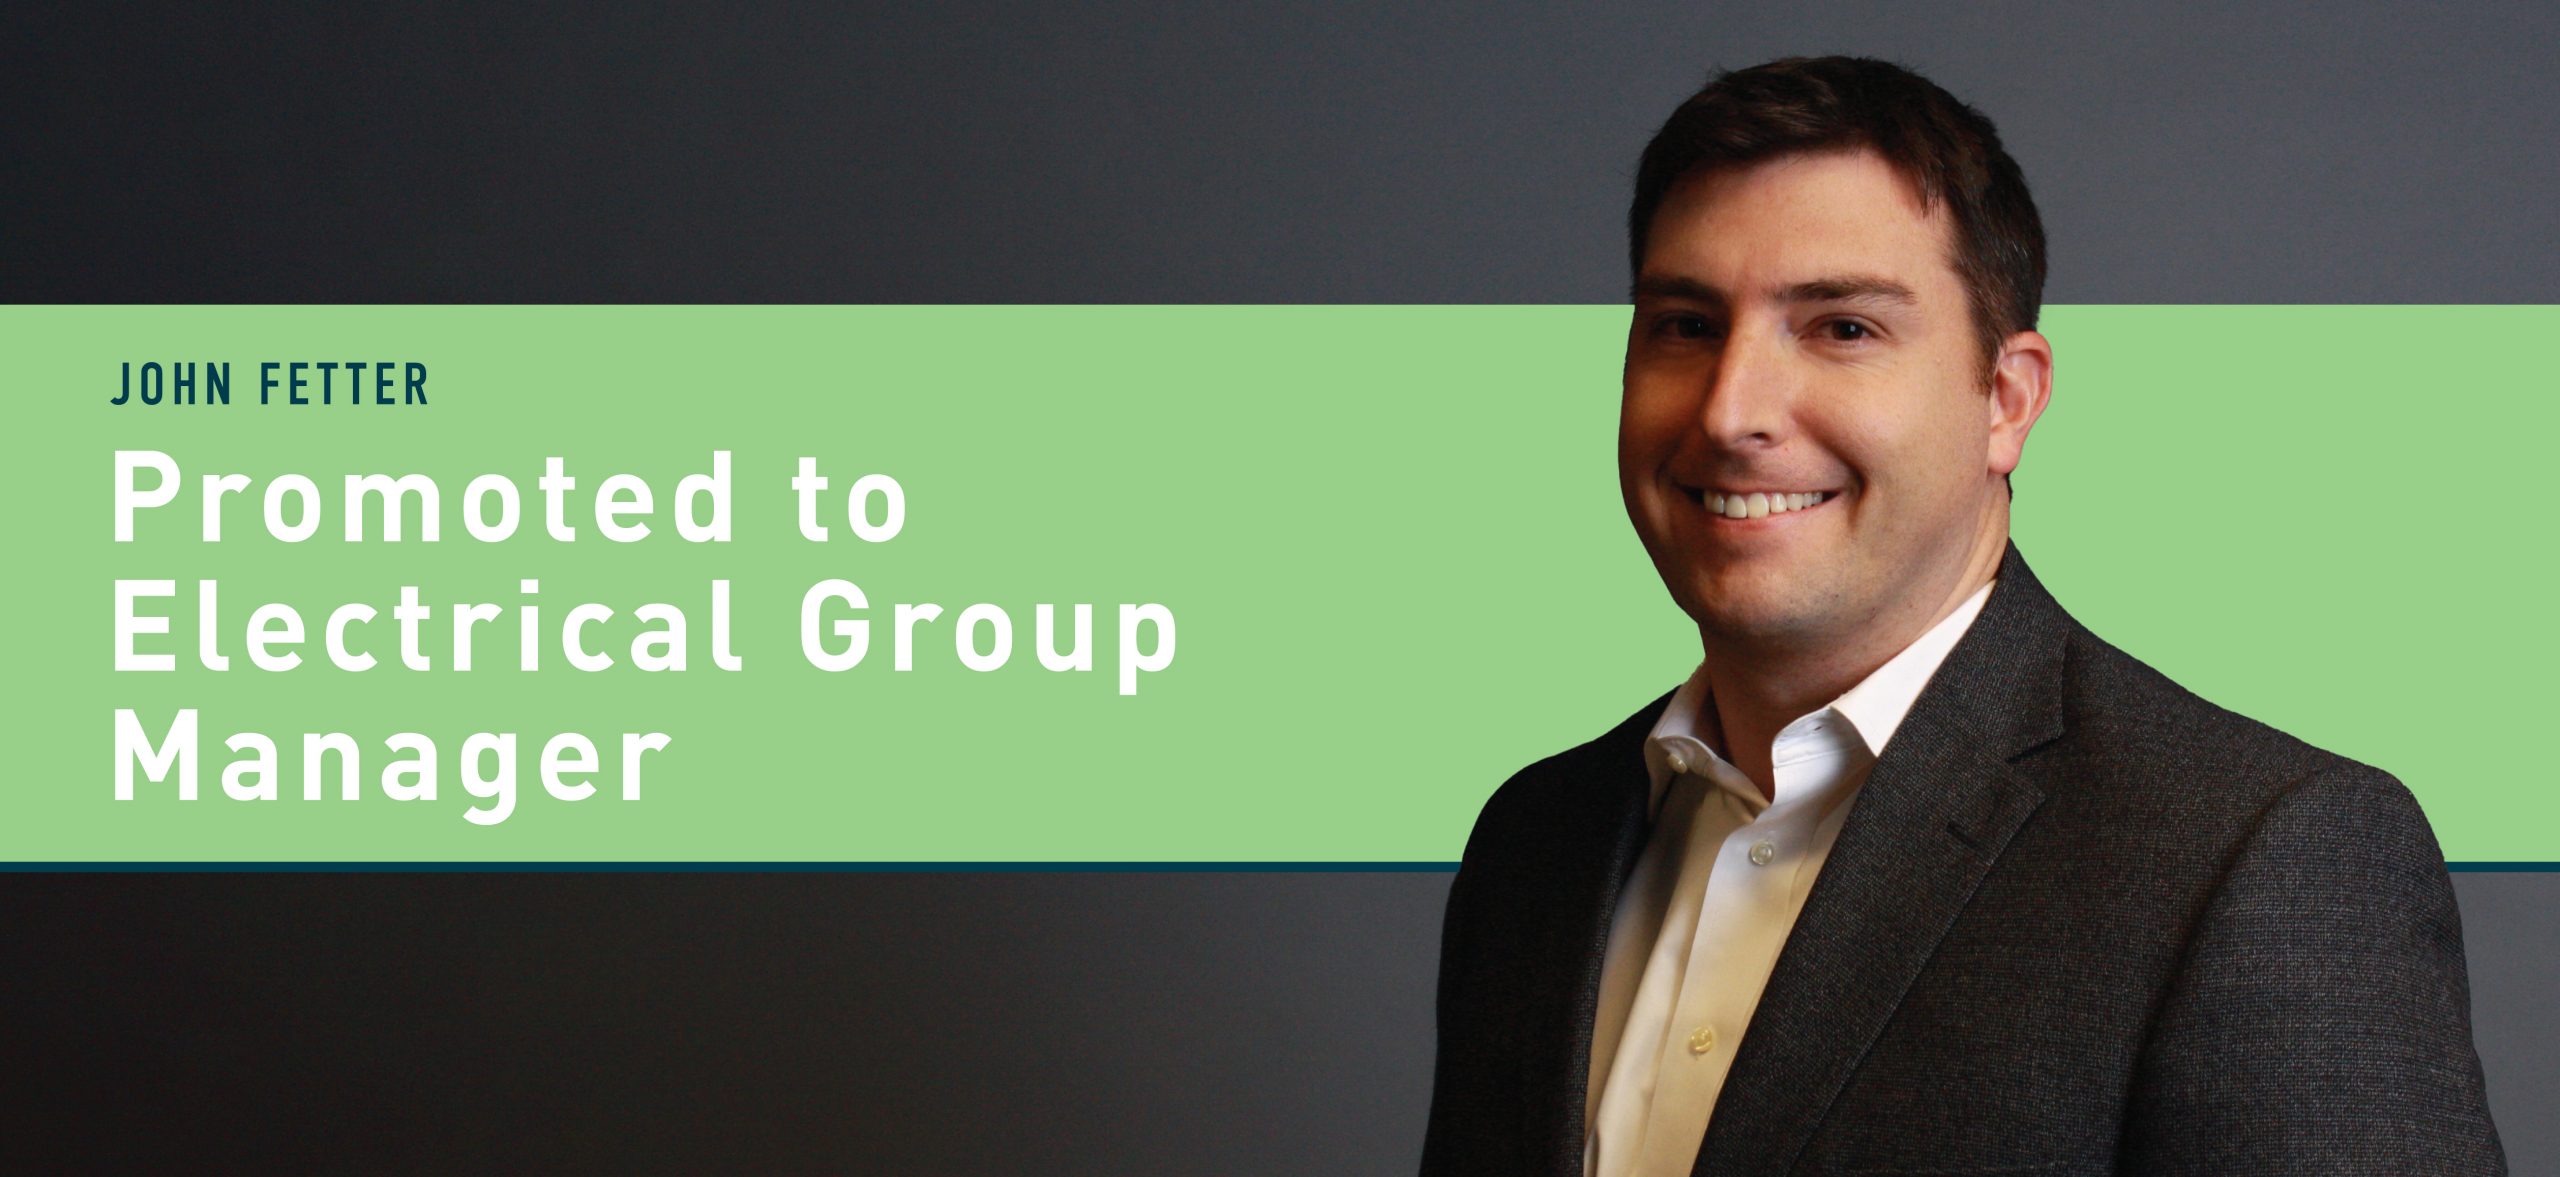 John Fetter, PE, REP, LEED Green Associate Promoted to Electrical Group Manager